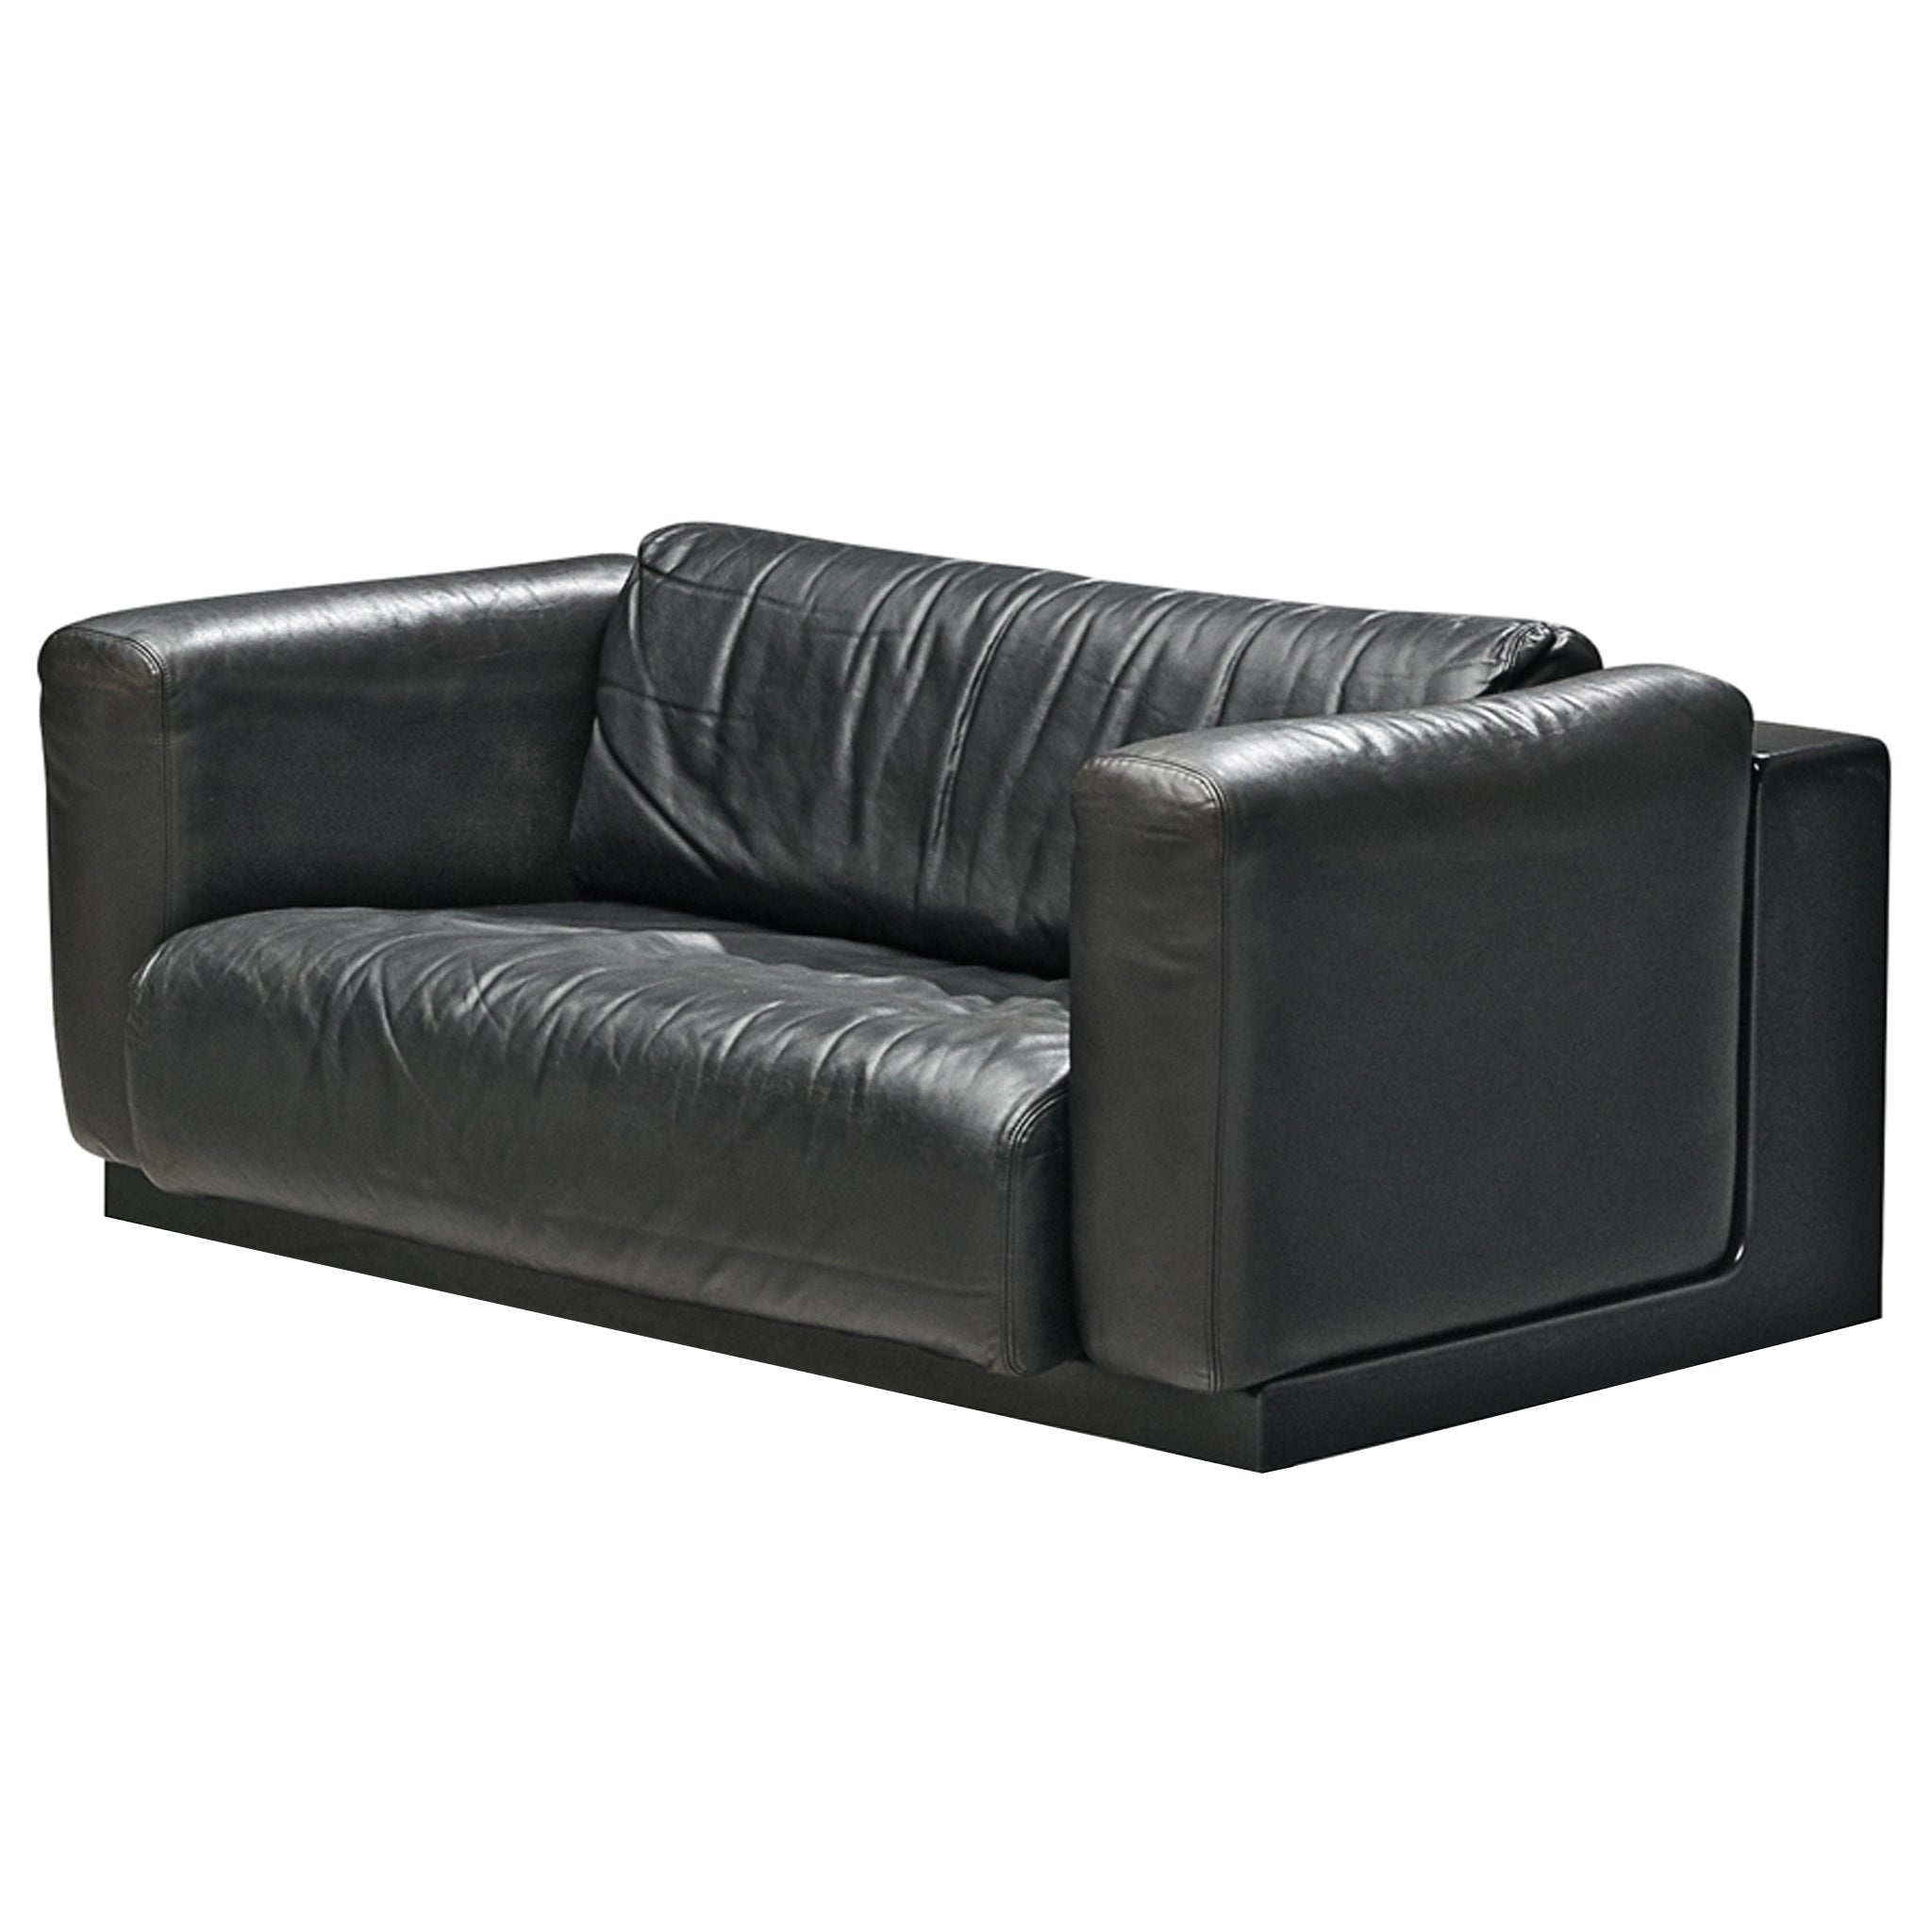 Cini Boeri for Knoll Pair Seat in Black Leather